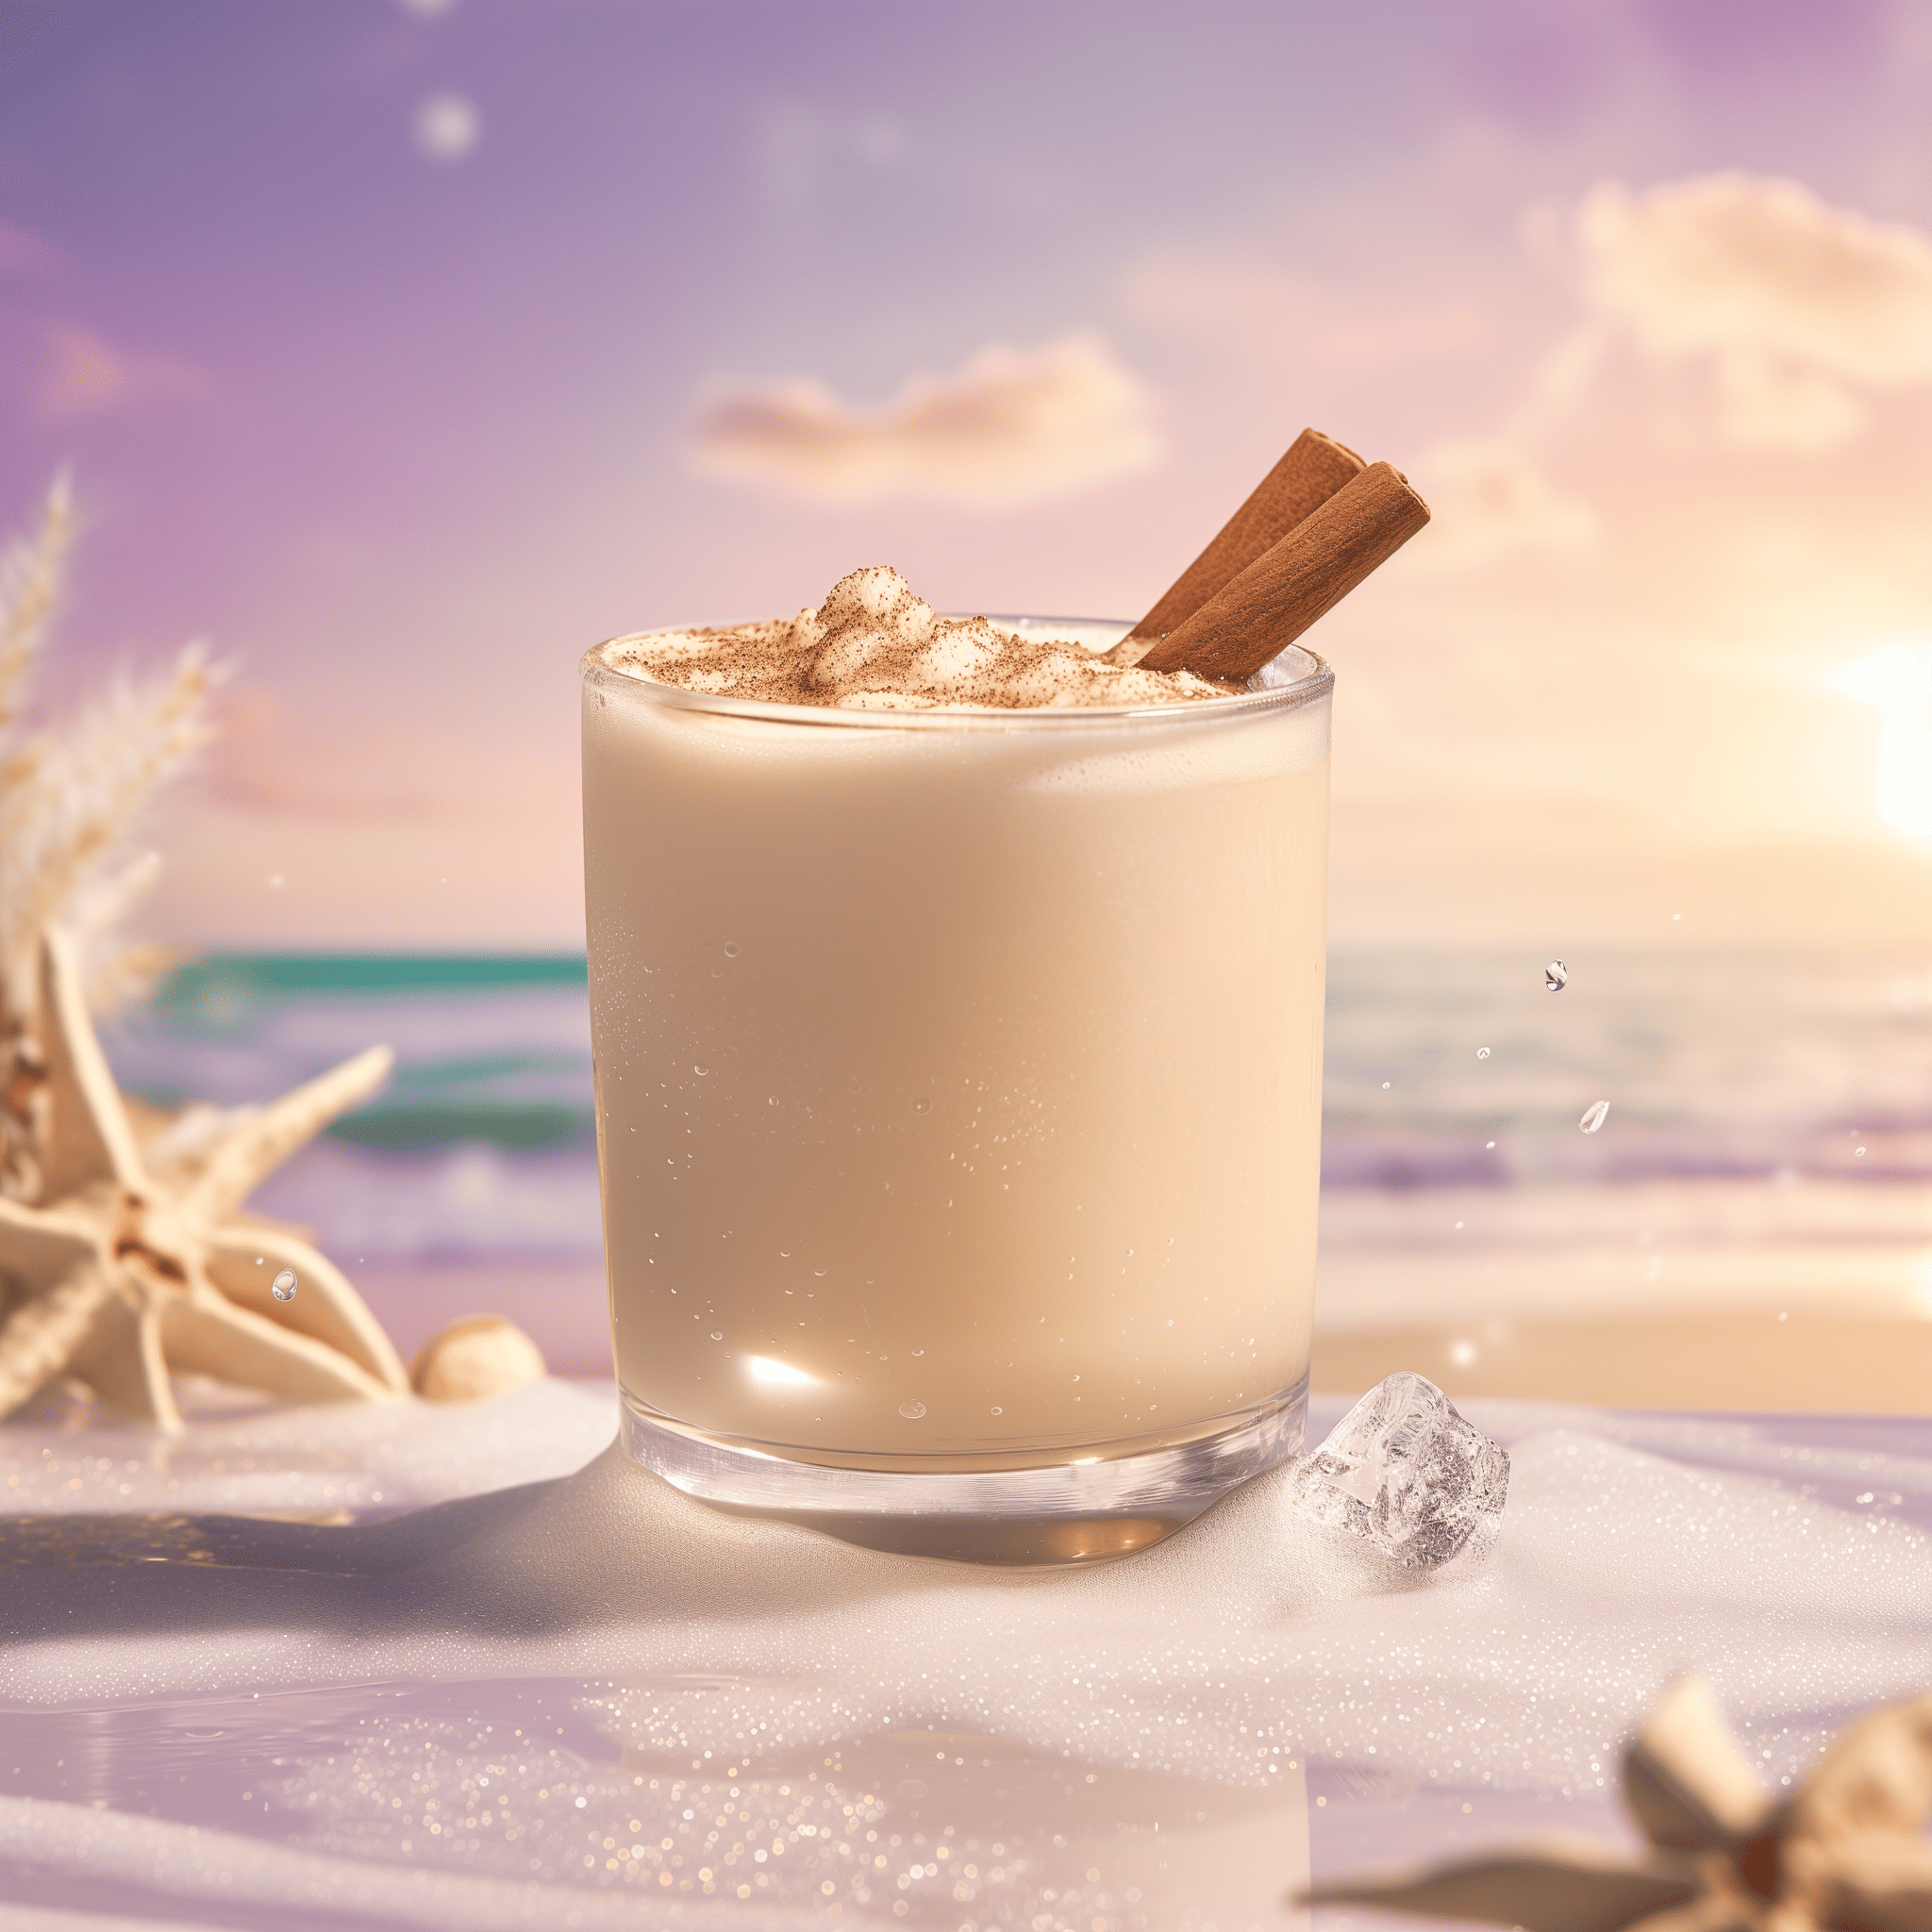 Sky Juice Cocktail Recipe - Sky Juice offers a creamy and sweet flavor profile with a subtle kick from the gin or rum. The coconut water provides a refreshing base, while the condensed milk adds a rich sweetness. The nutmeg and cinnamon give it a warm, spiced undertone.